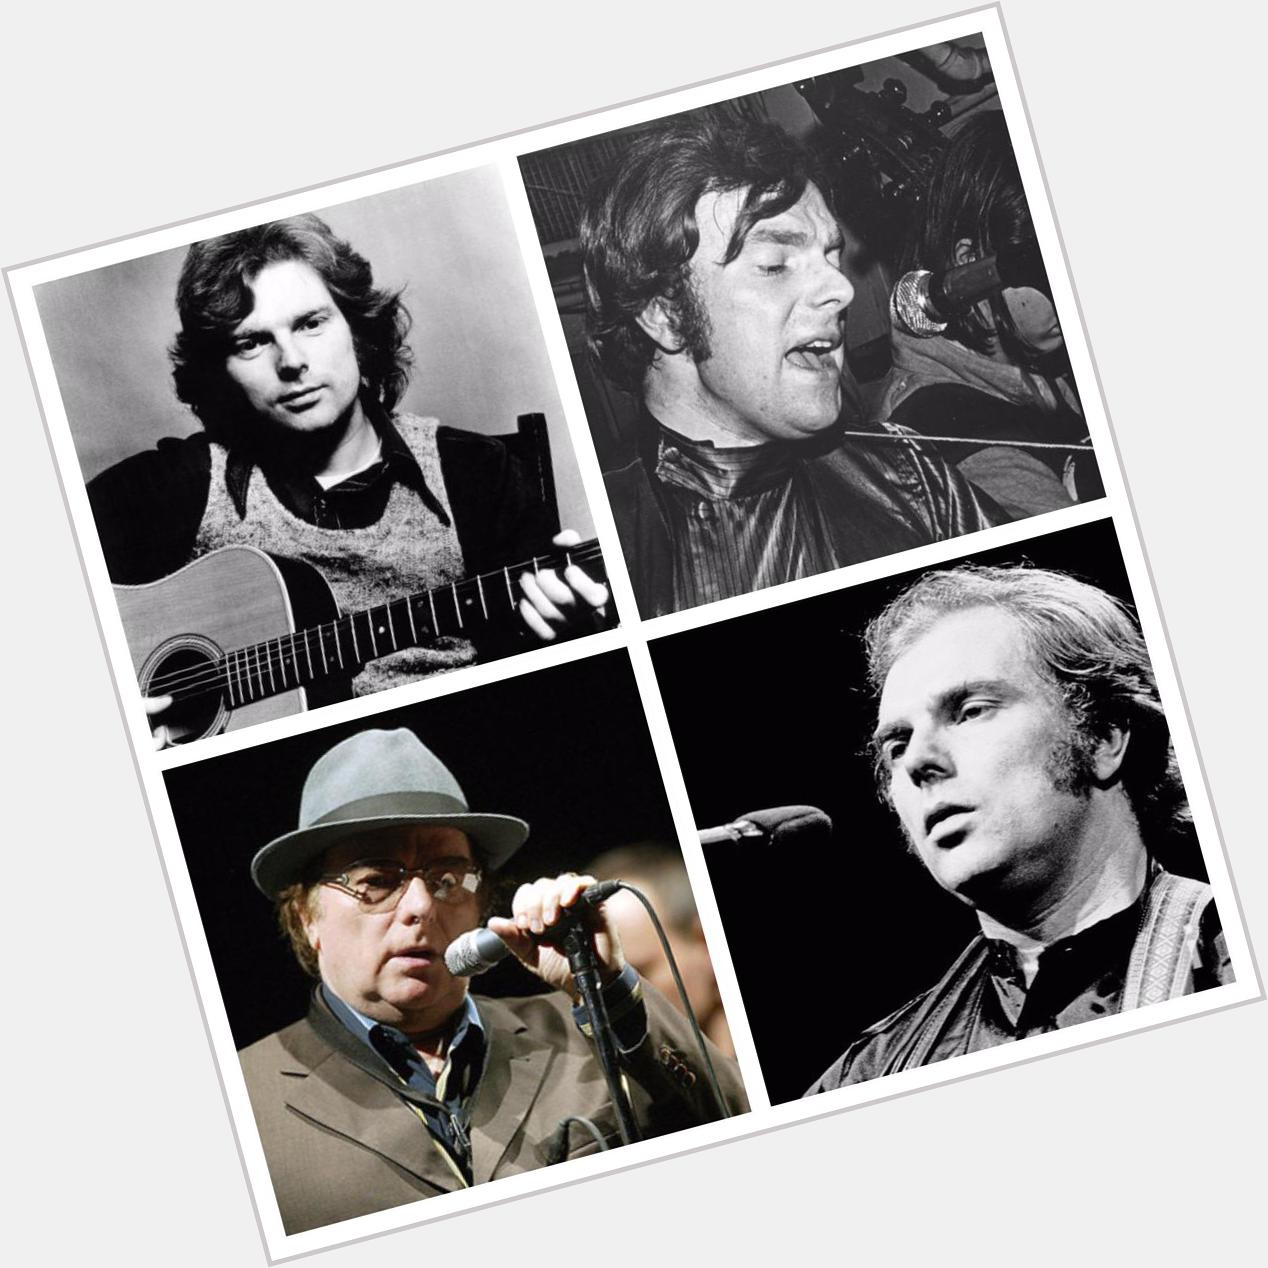 Happy Birthday! Van Morrison is 70 today, enjoy the gig on Cyprus Avenue if you\re going. 